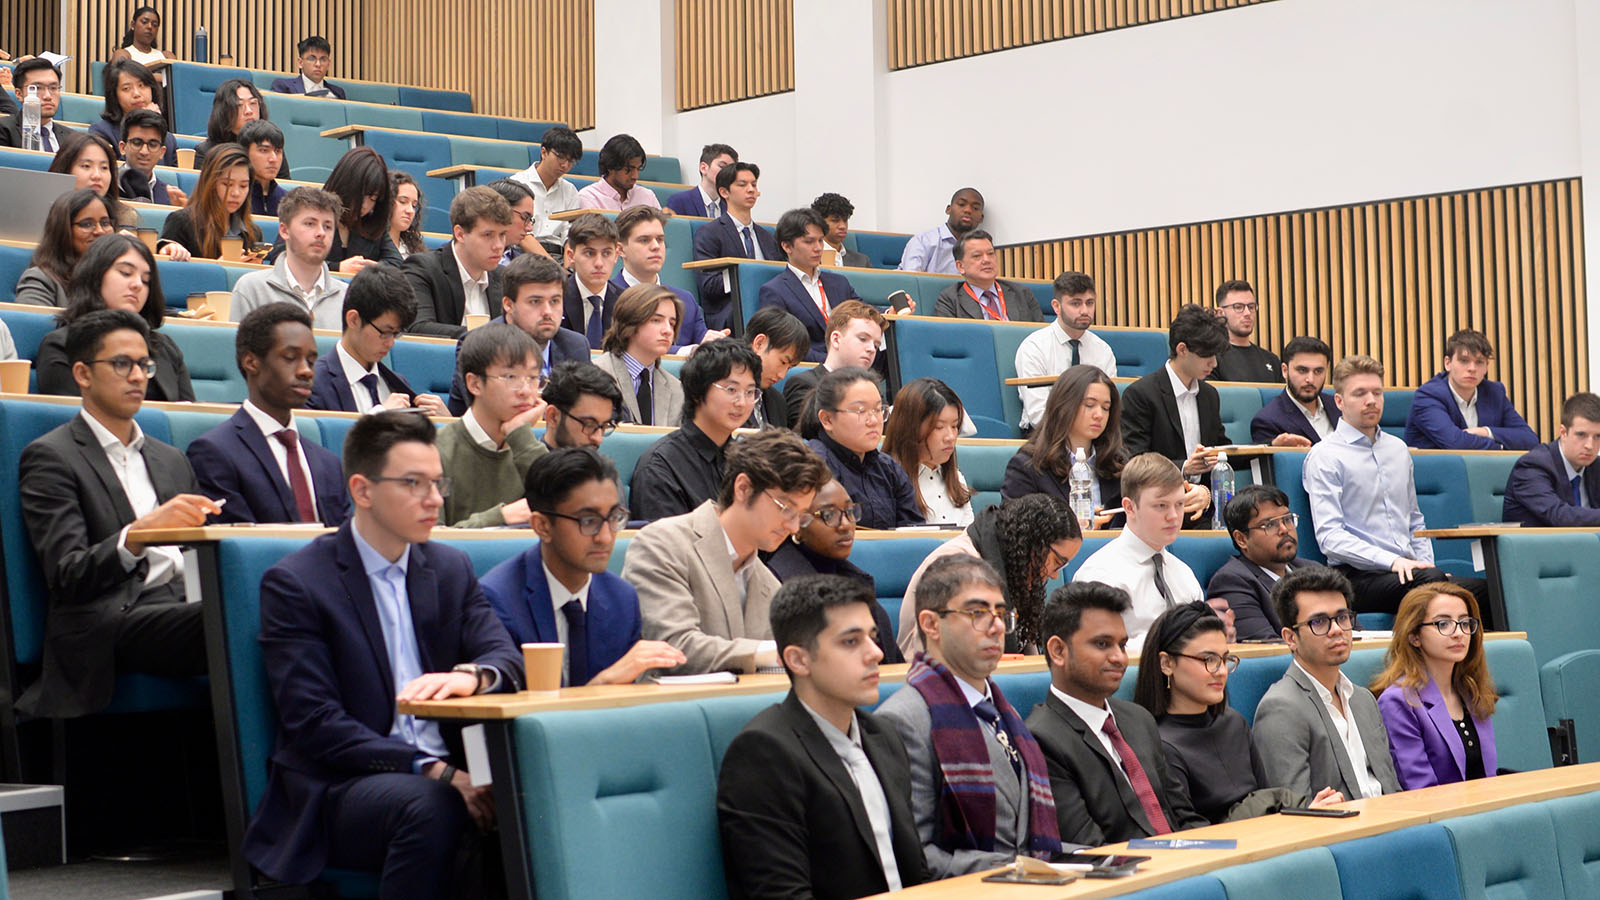 Members of the Ghosal Fund sitting in a lecture theatre